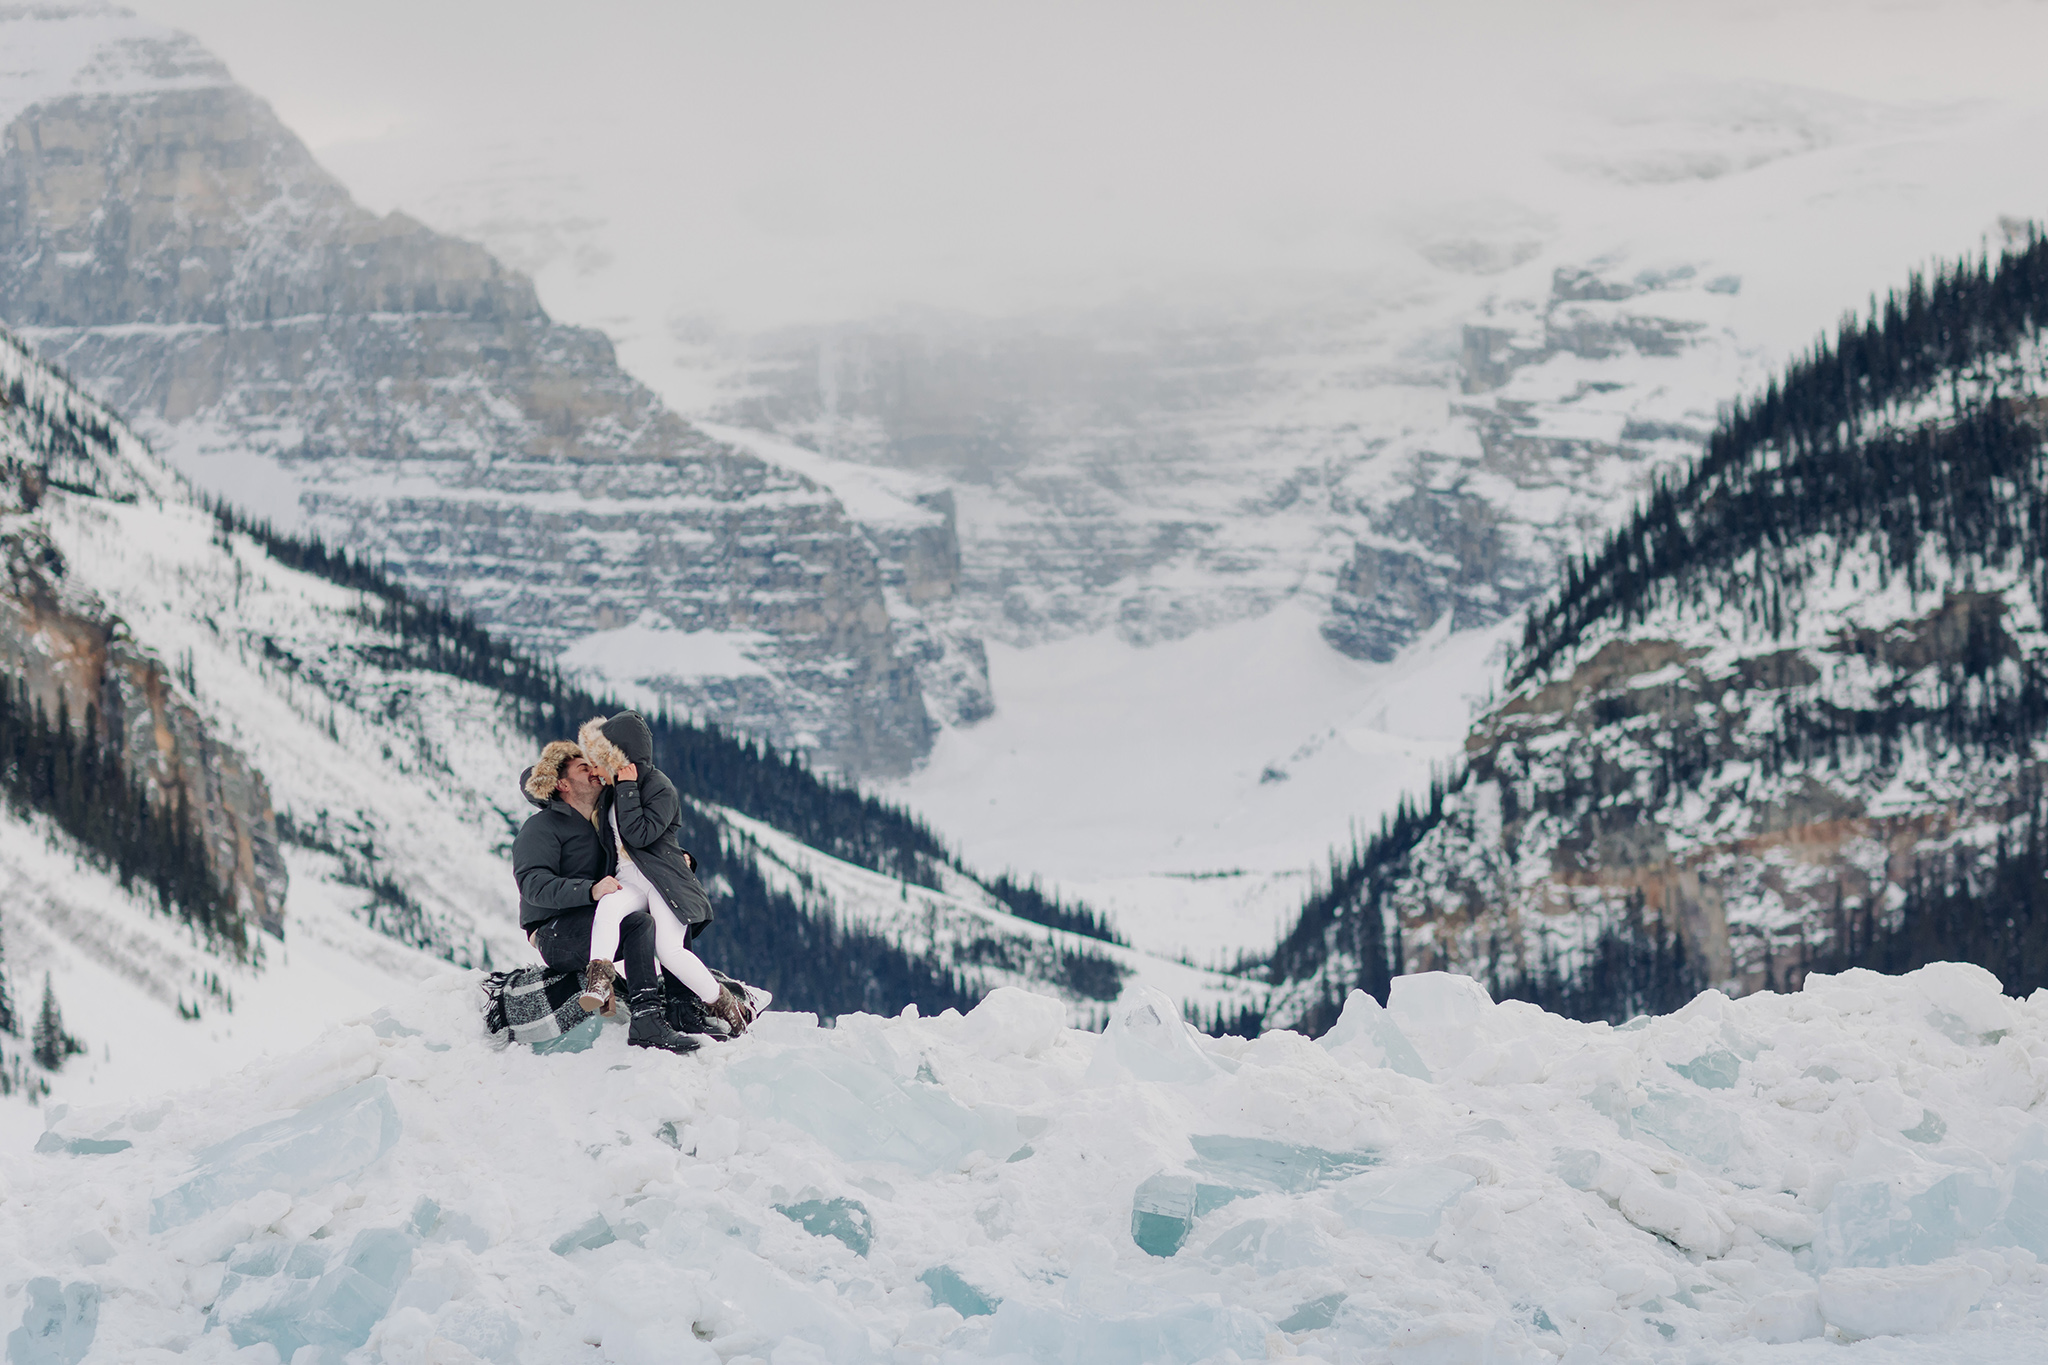 winter mountain vacation at Lake Louise Souvenir Vacation photos in the snow on the remains of the ice castle